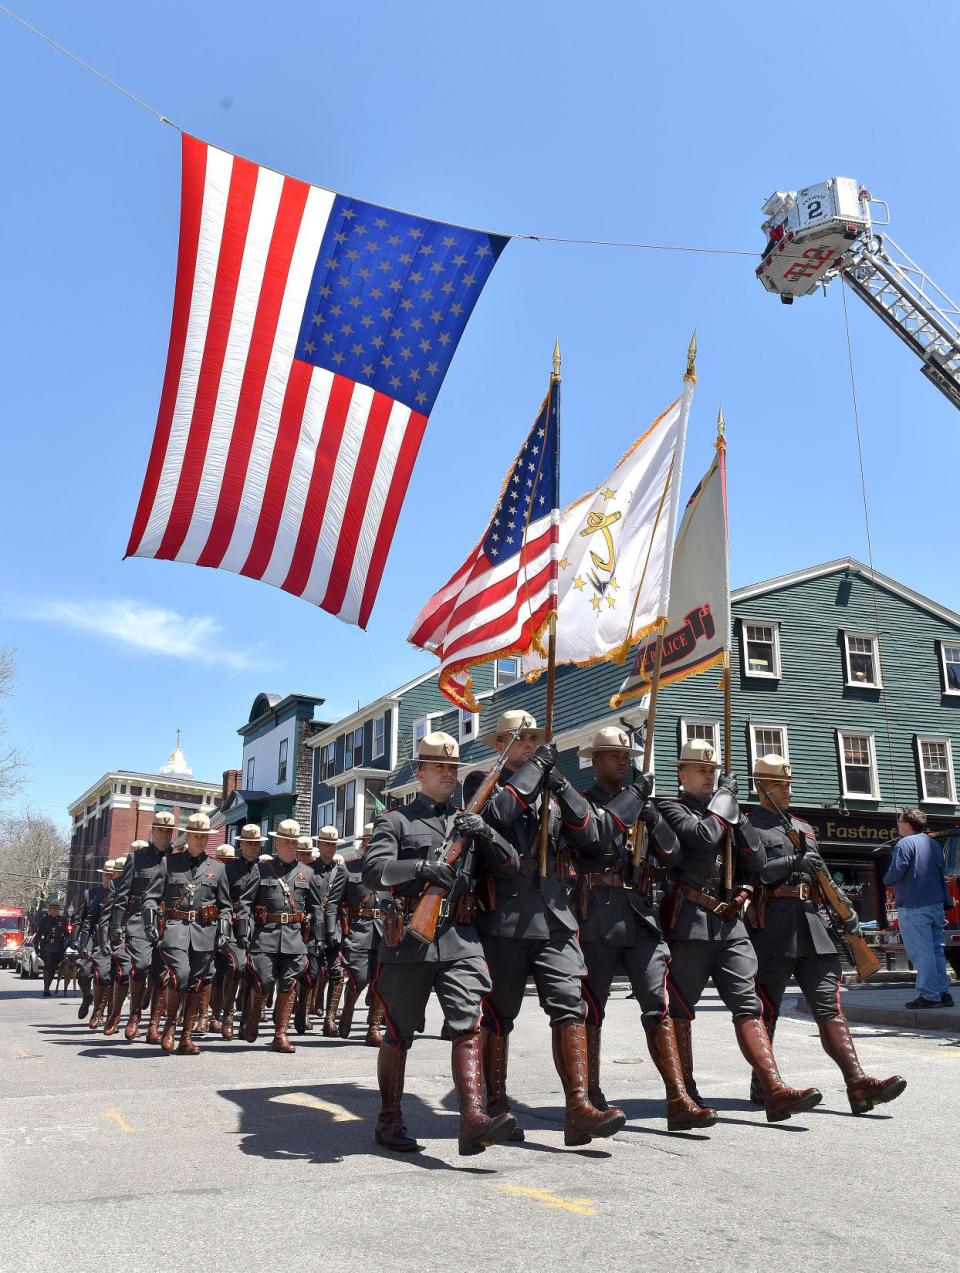 The 2022 Aquidneck Island National Police Parade is scheduled for May 1.